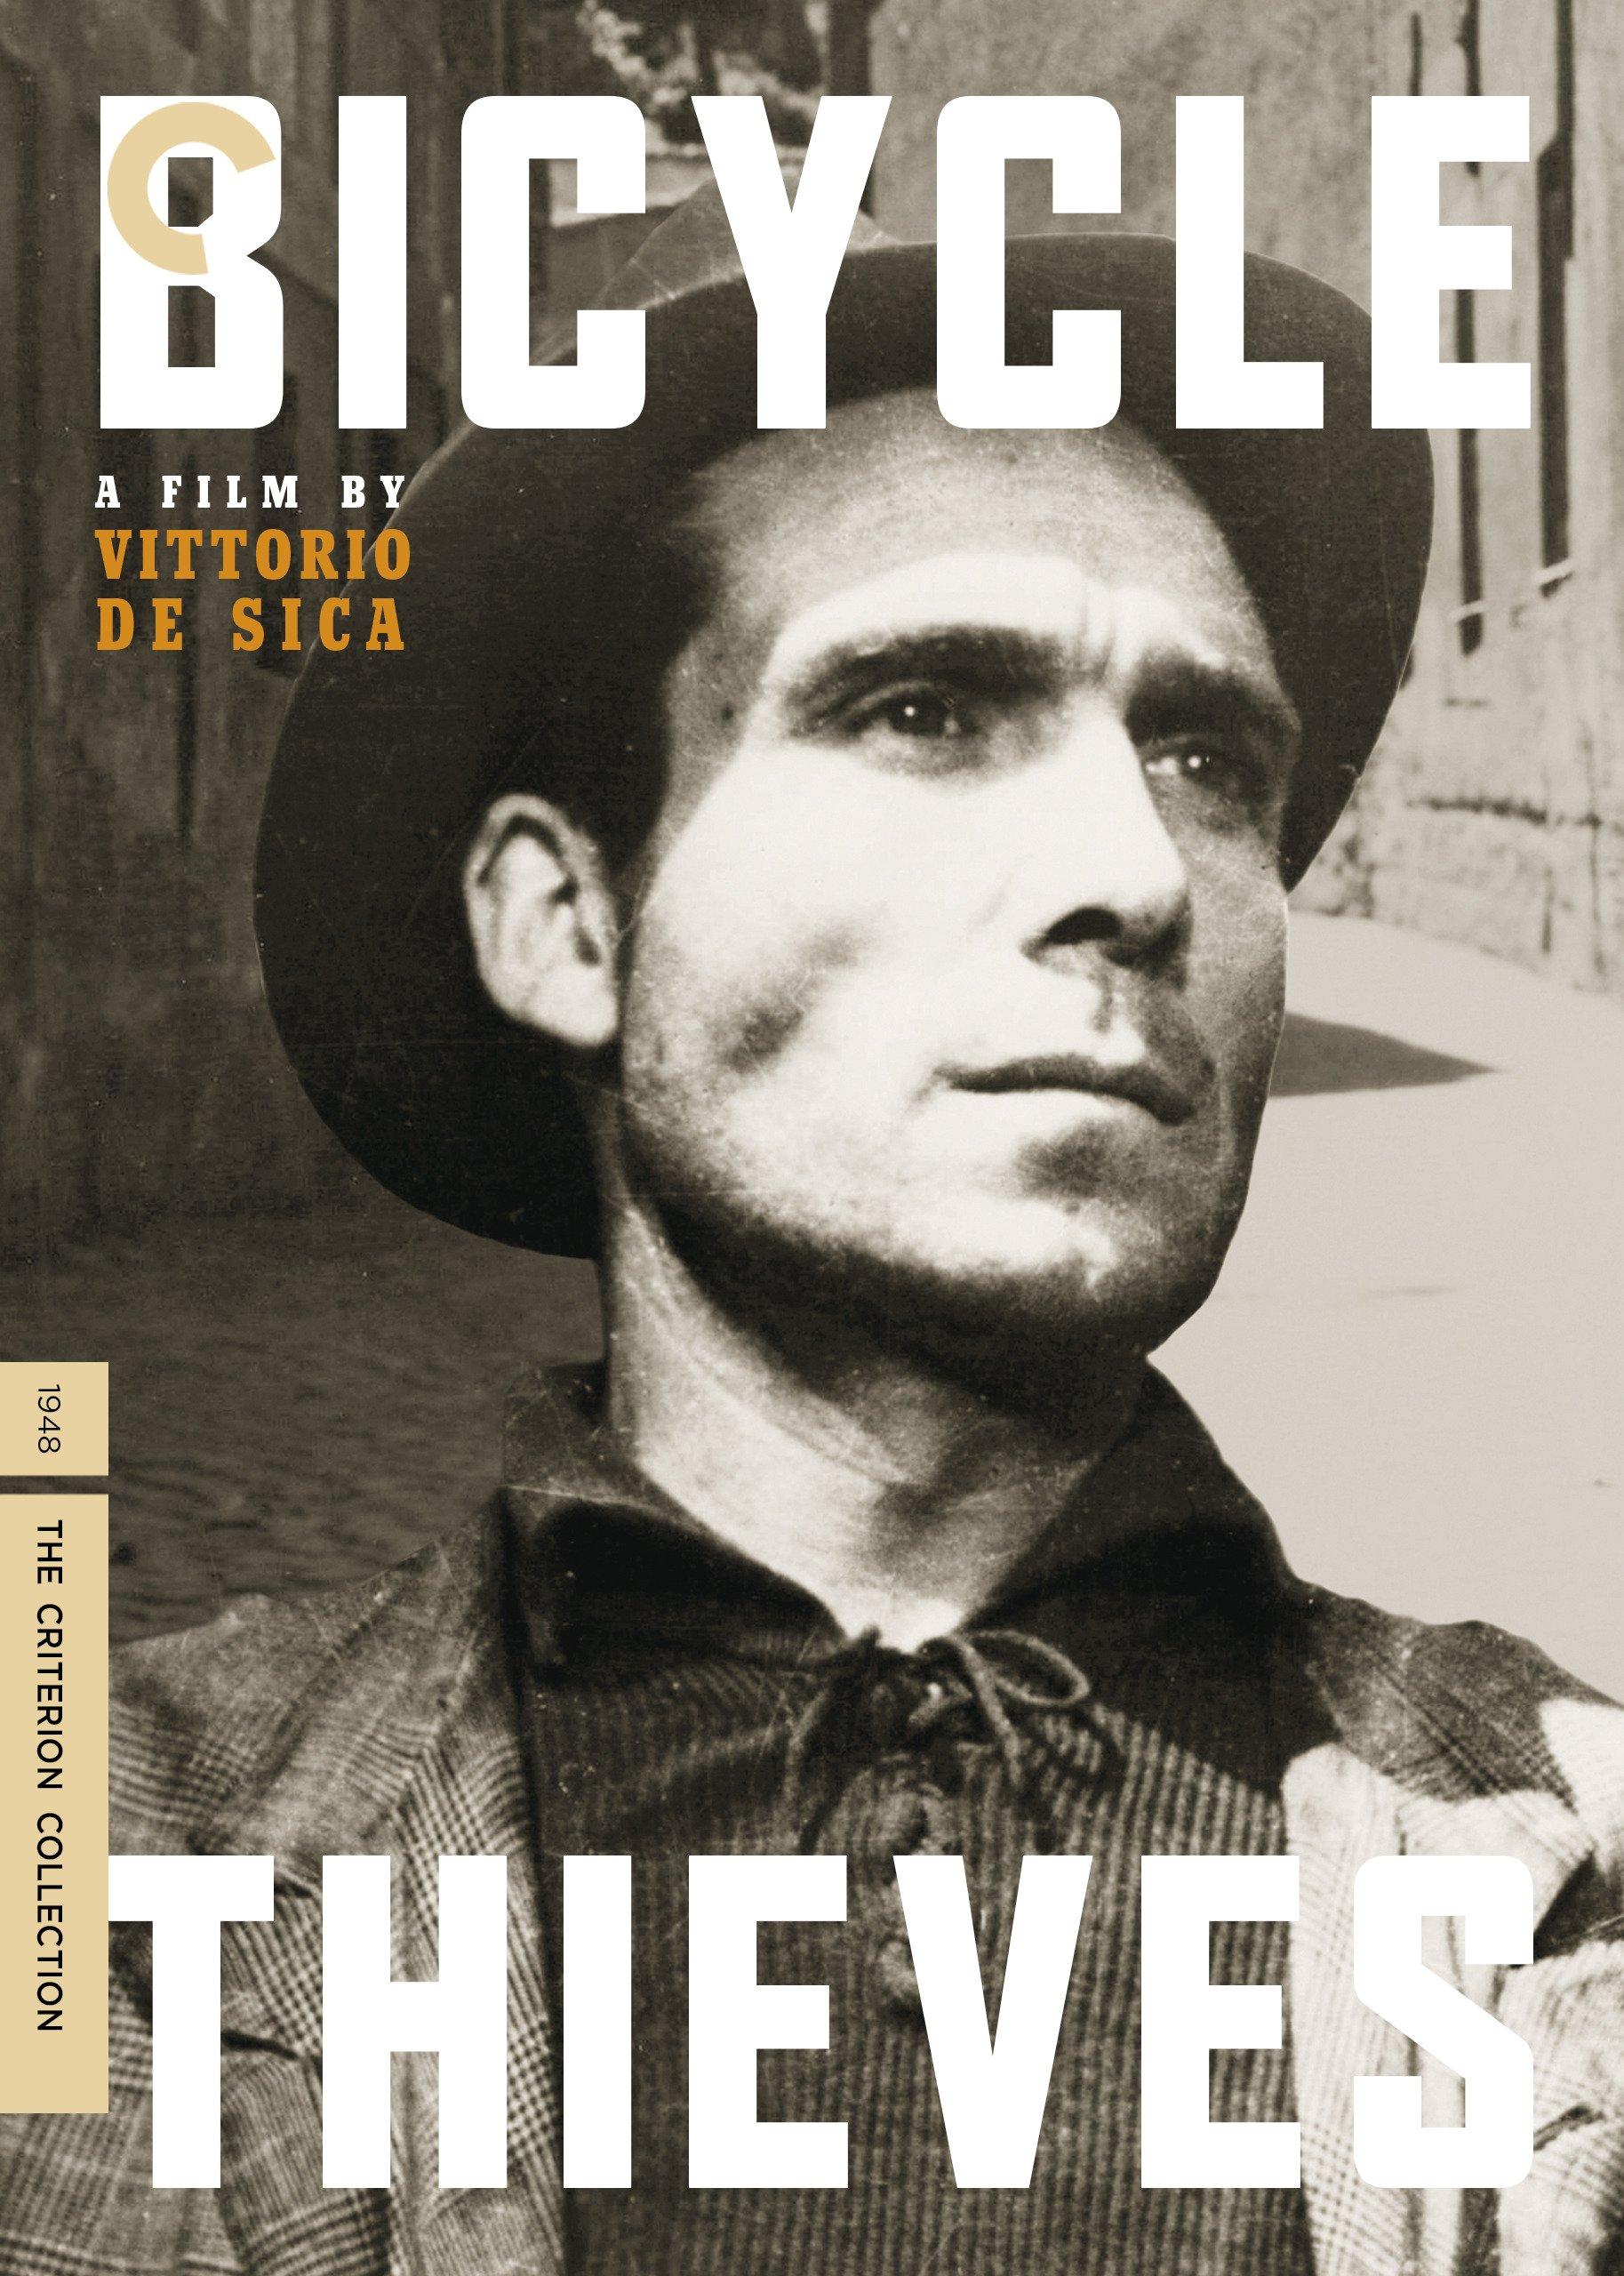 Watch Bicycle Thieves (English Subtitled)